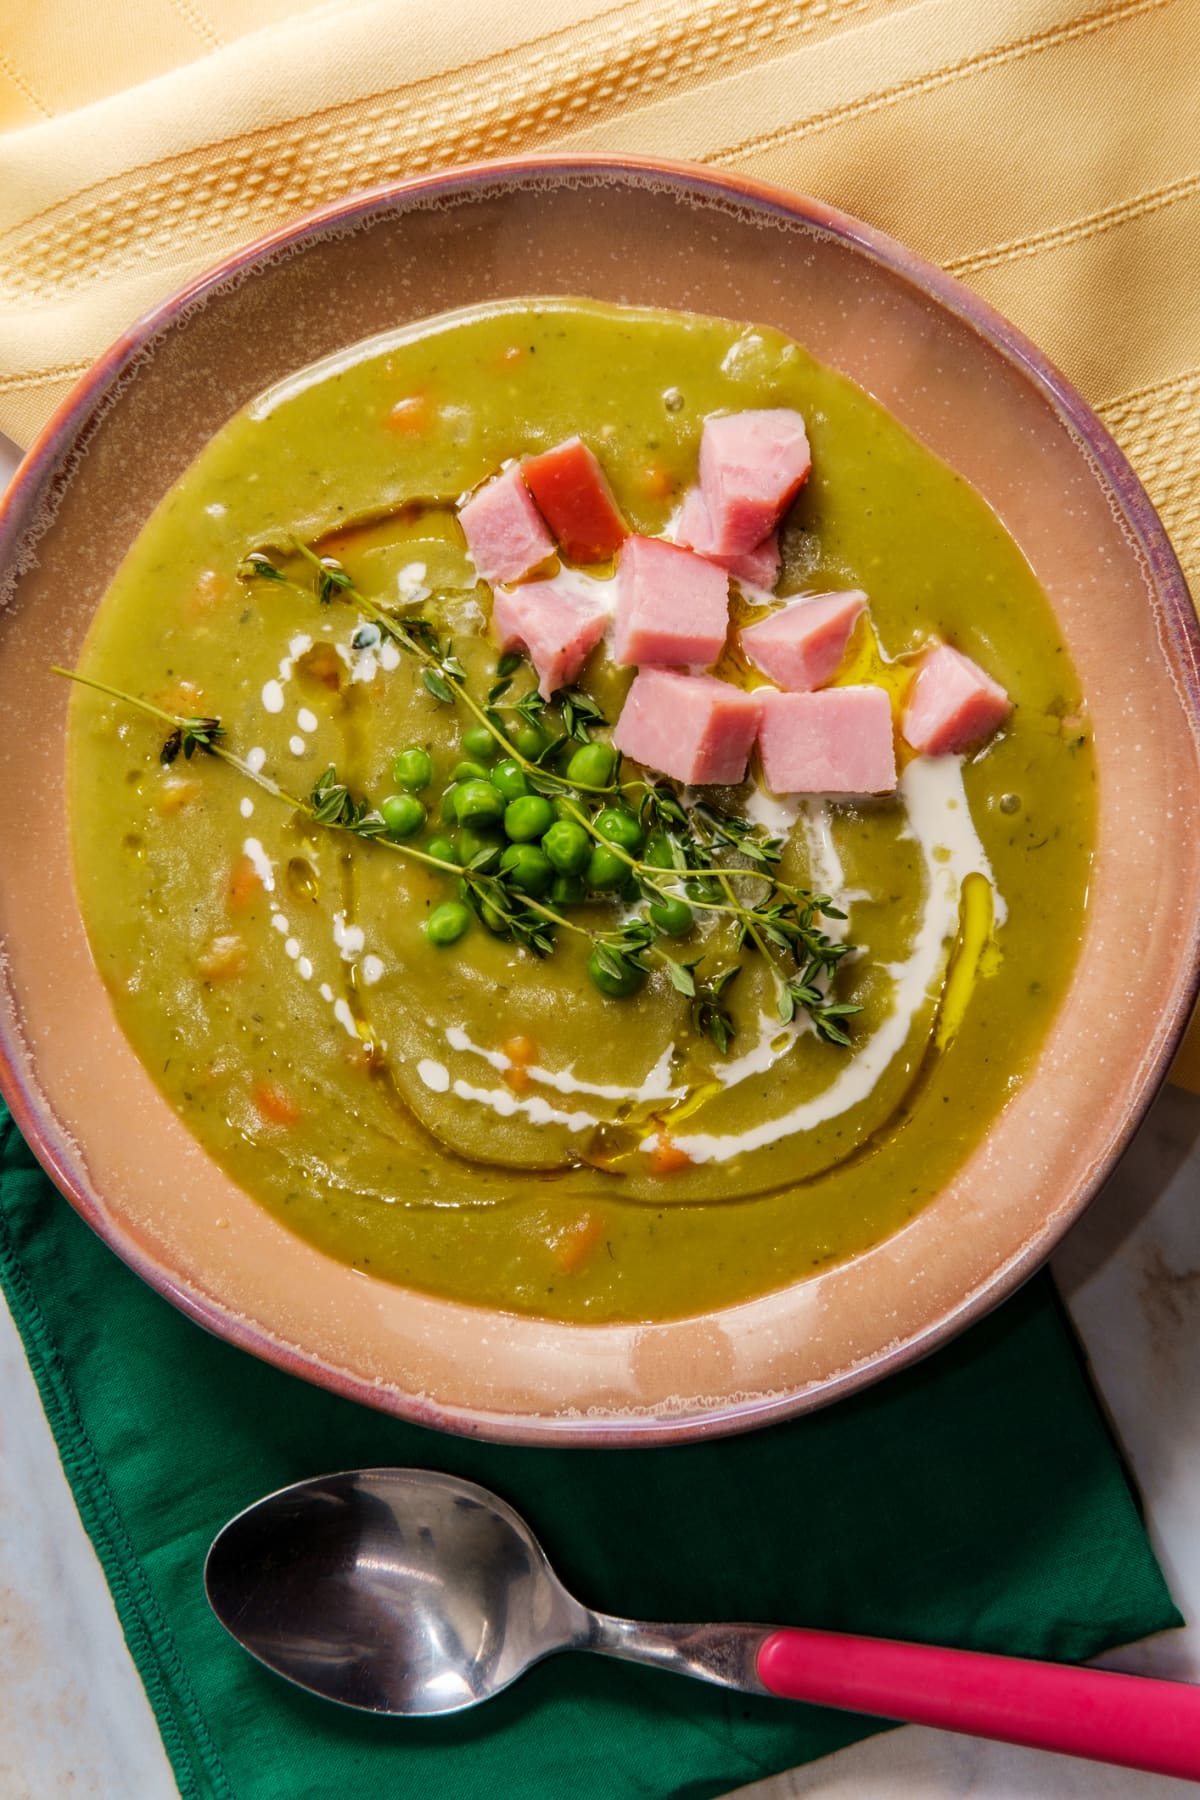 Bowl of split pea soup topped with peas, ham and herbs